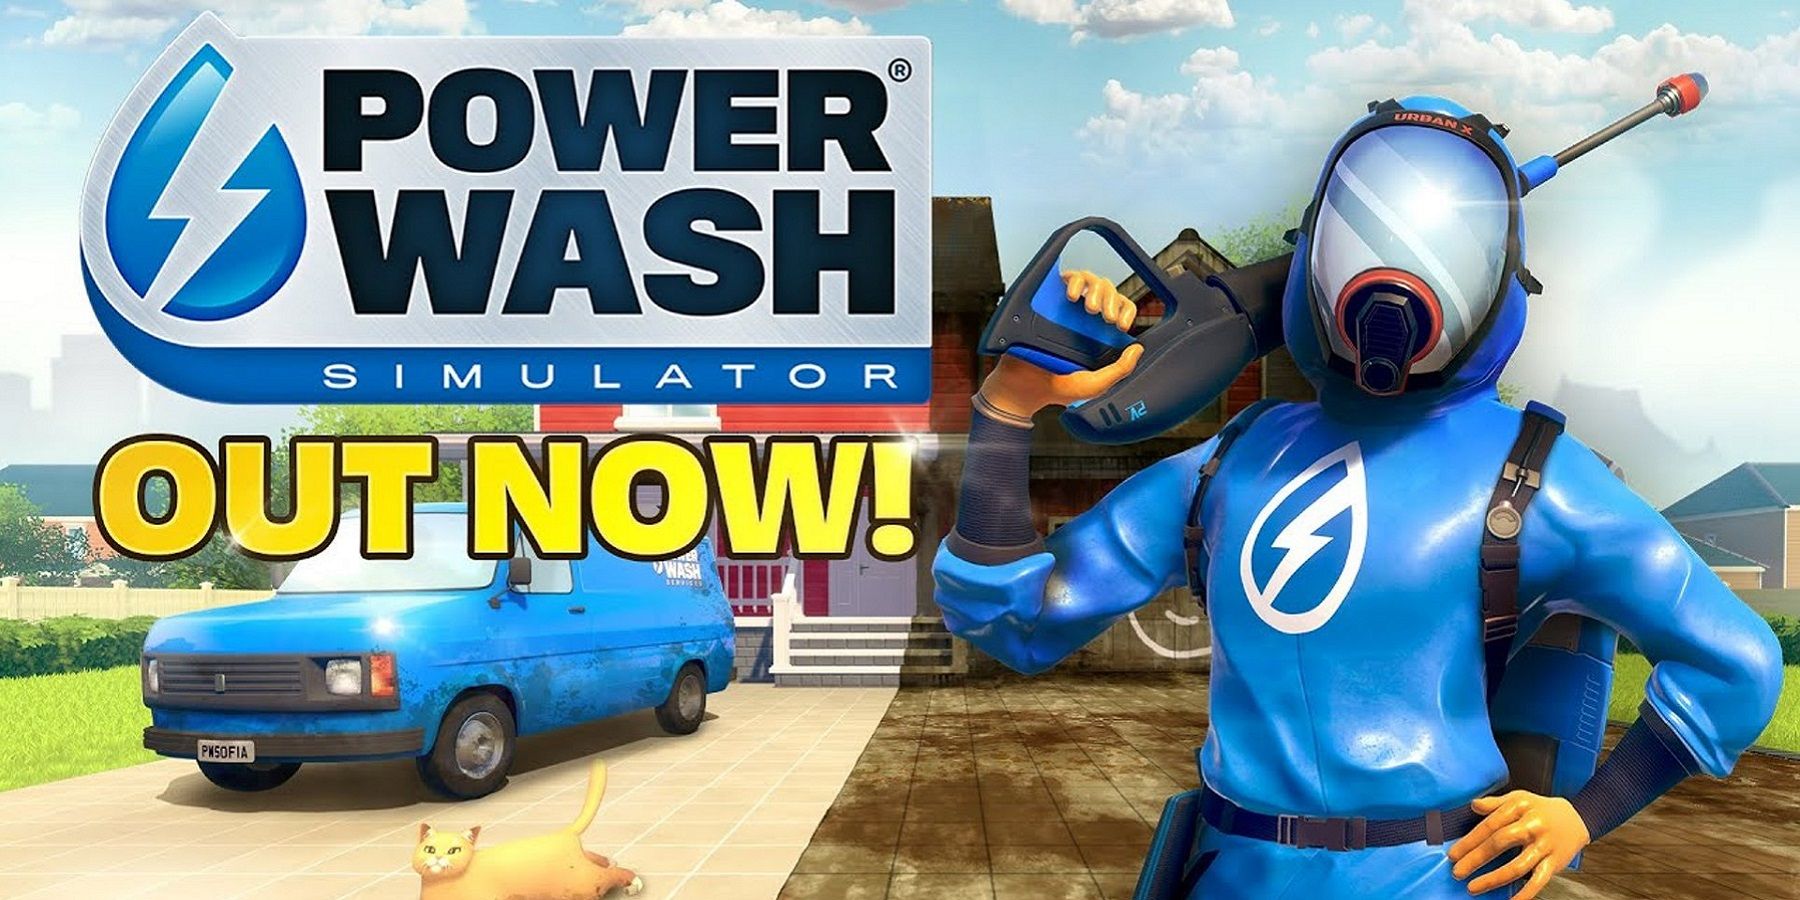 Image from PowerWash Simulator showing the main character in front of a half clean house.